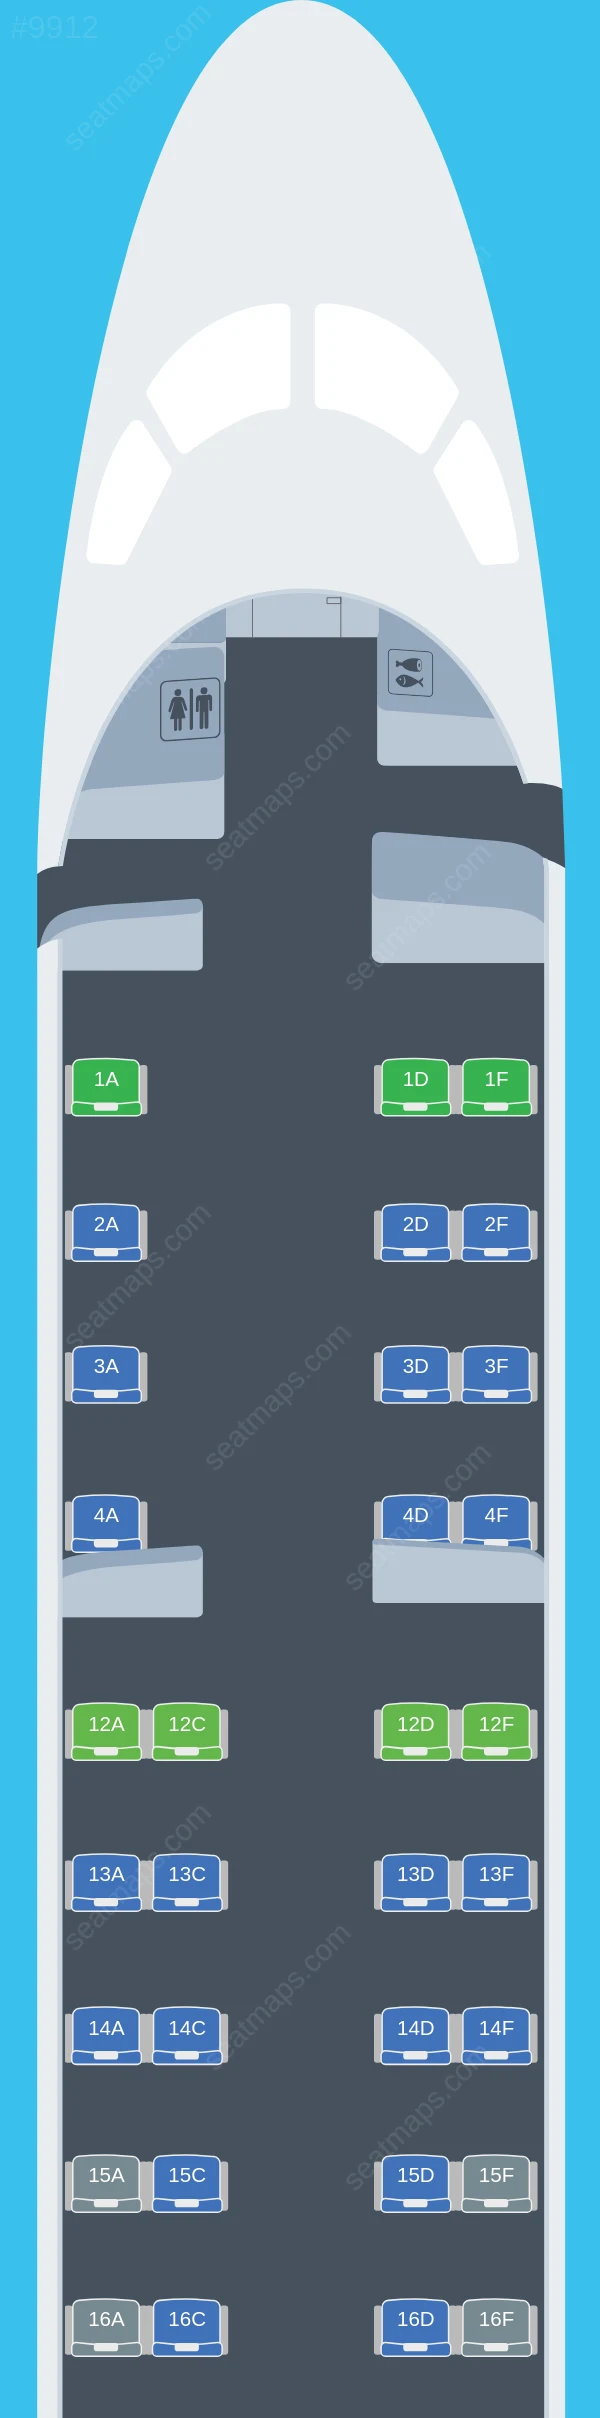 Mauritania Airlines Embraer E175 seatmap preview